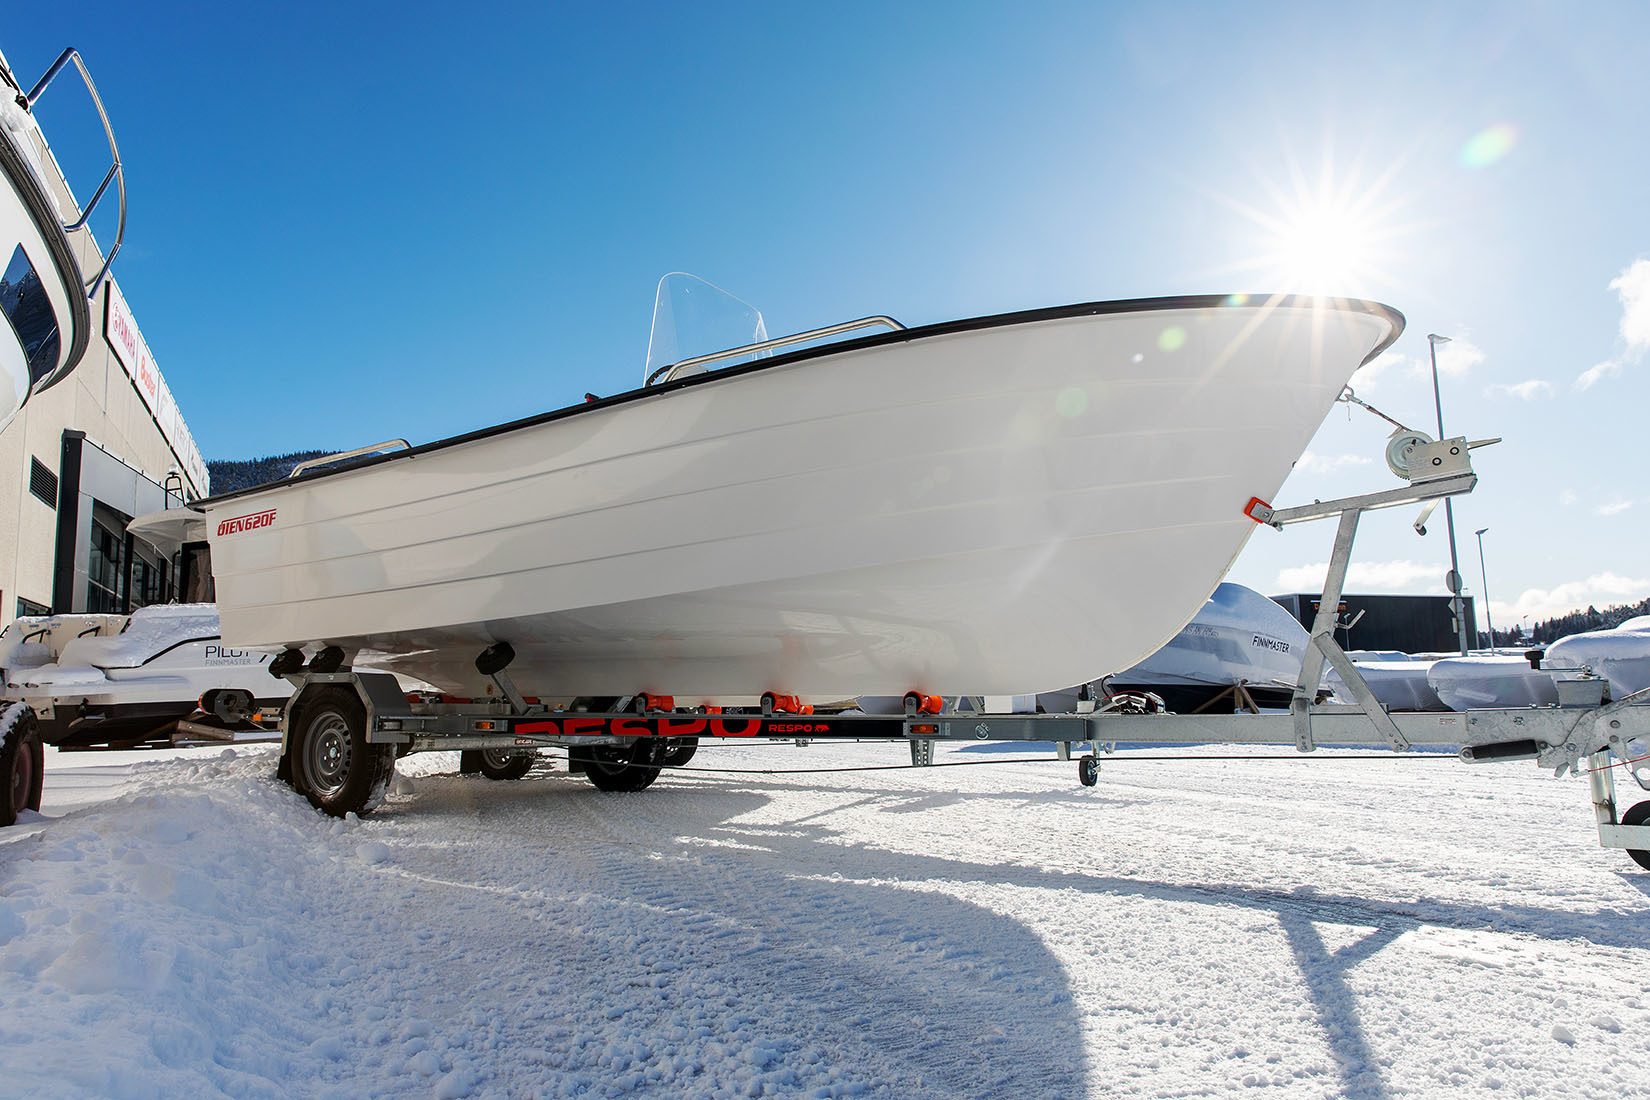 Naval architecture, Sky, Snow, Watercraft, Boat, Wheel, Tire, Slope